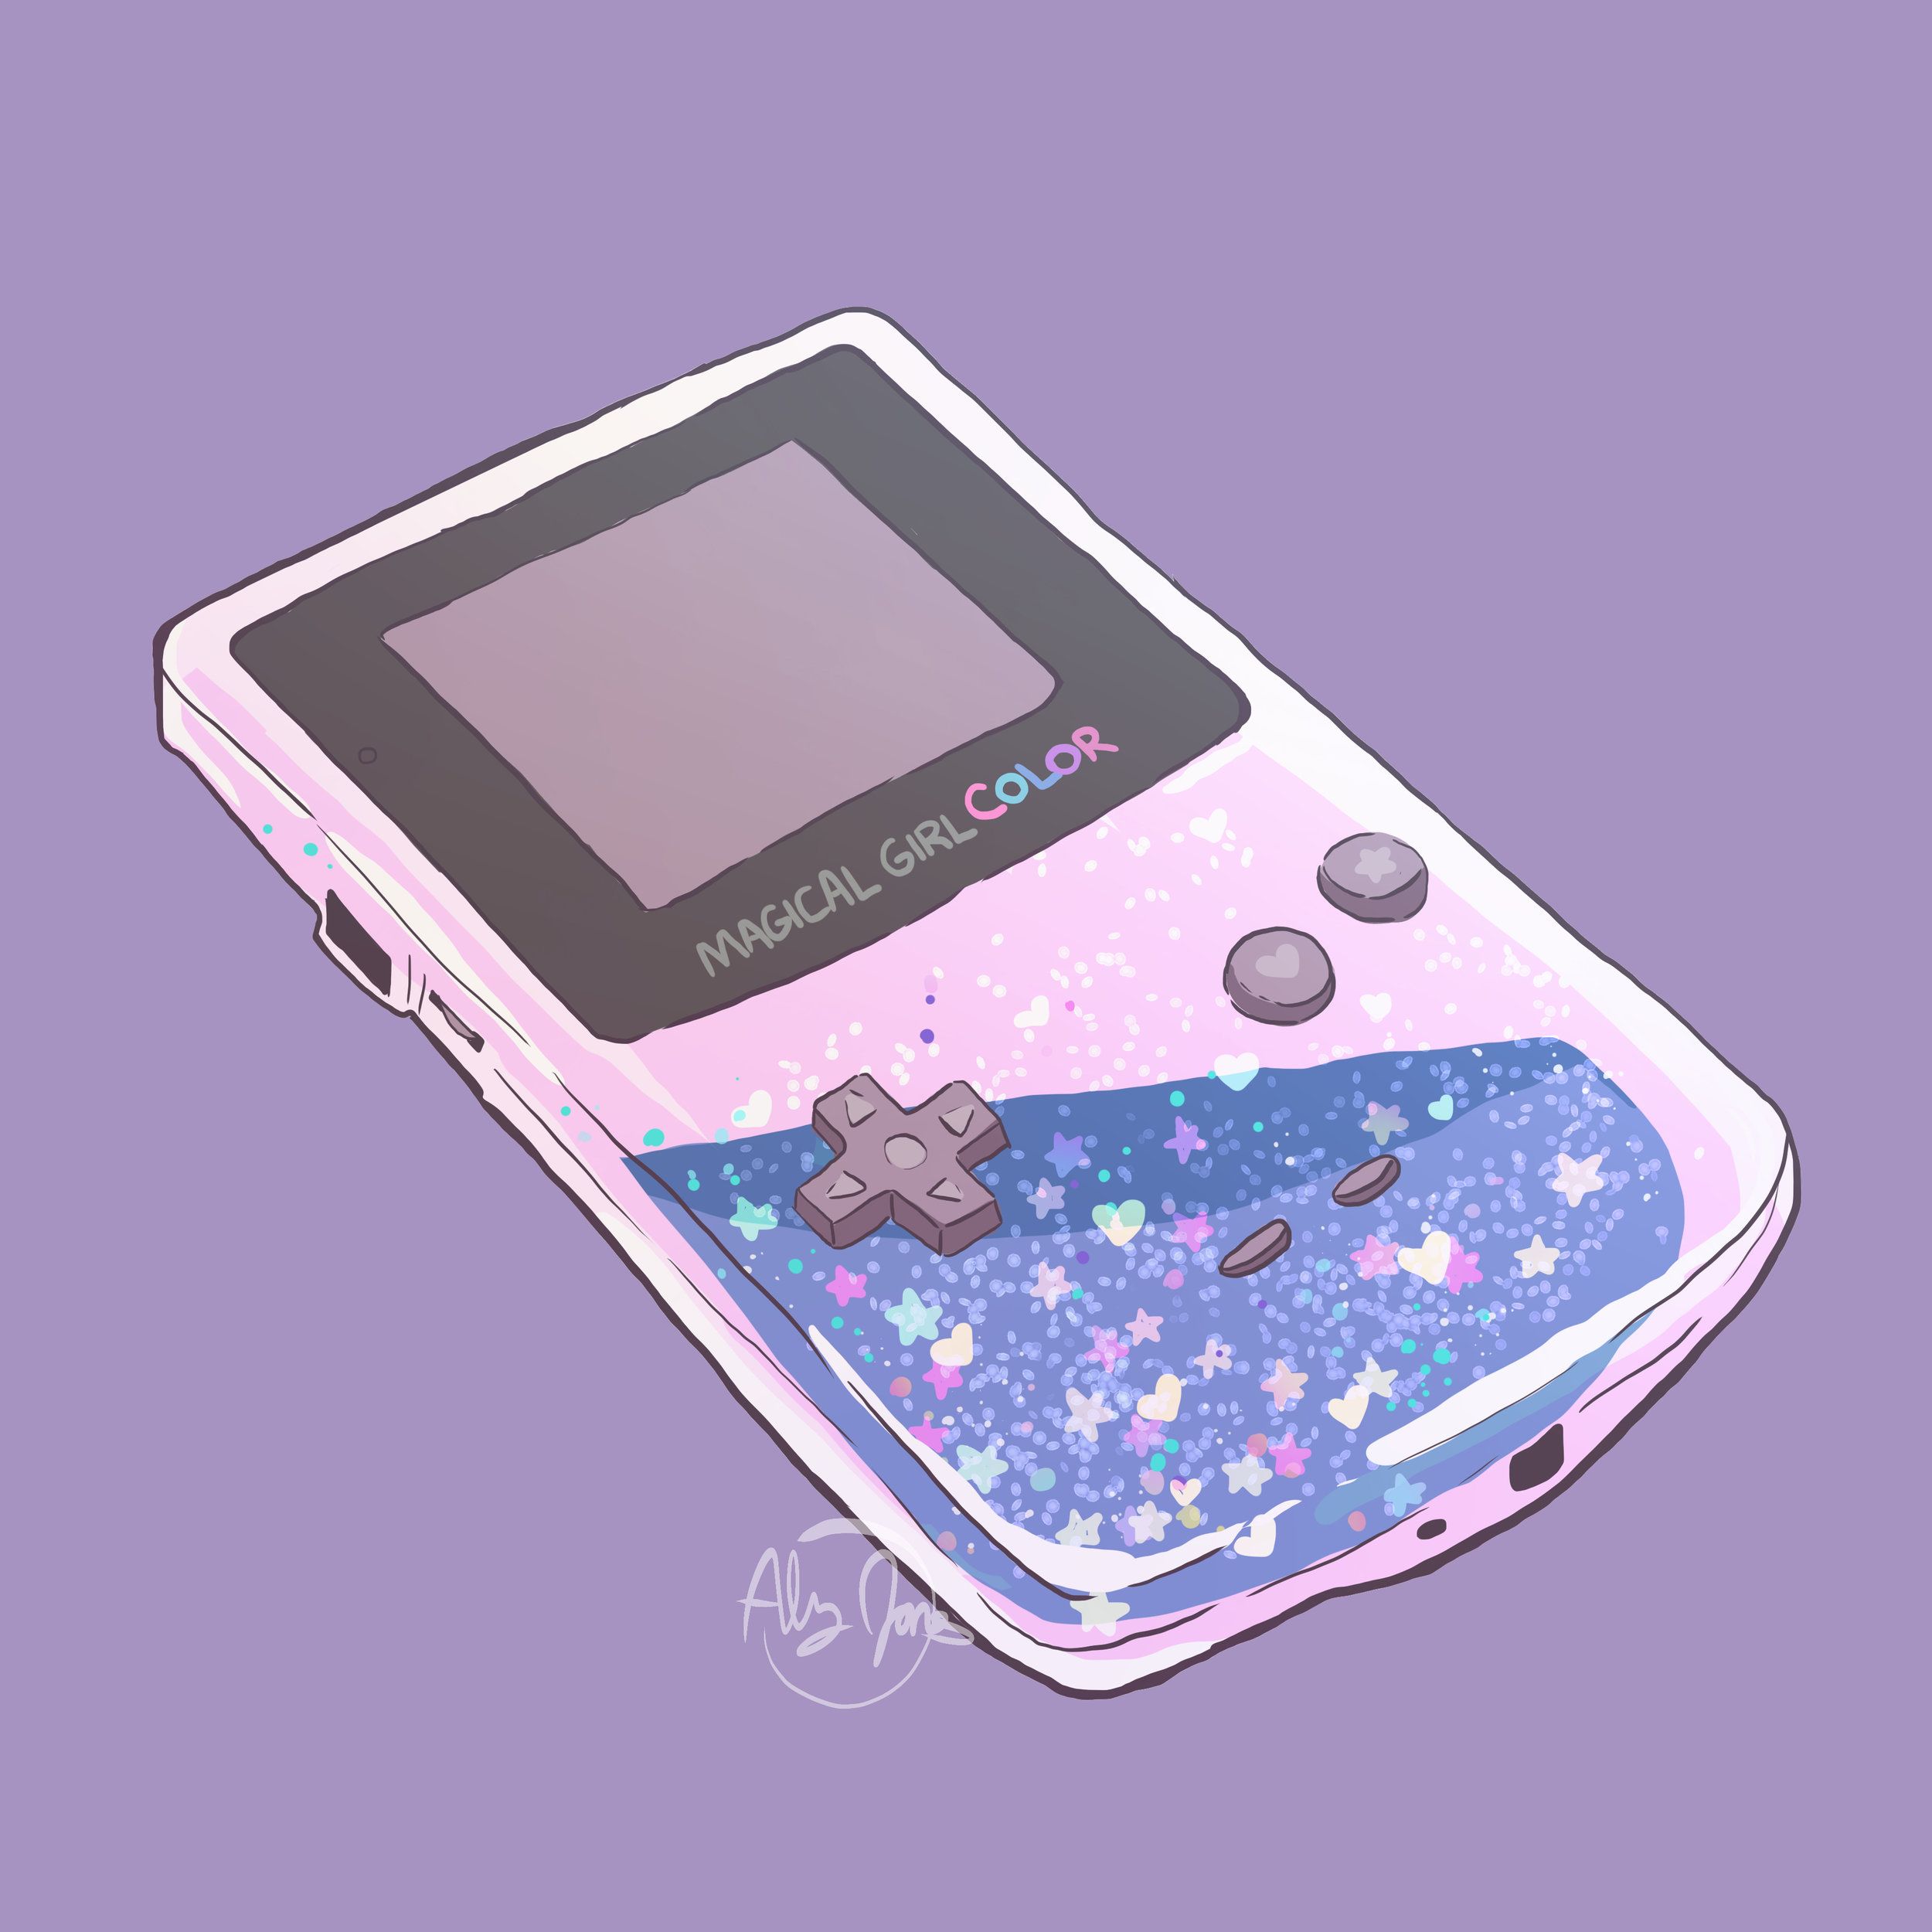 A digital illustration of a Gameboy with a pink and blue design and magical girl color text on the screen - Game Boy